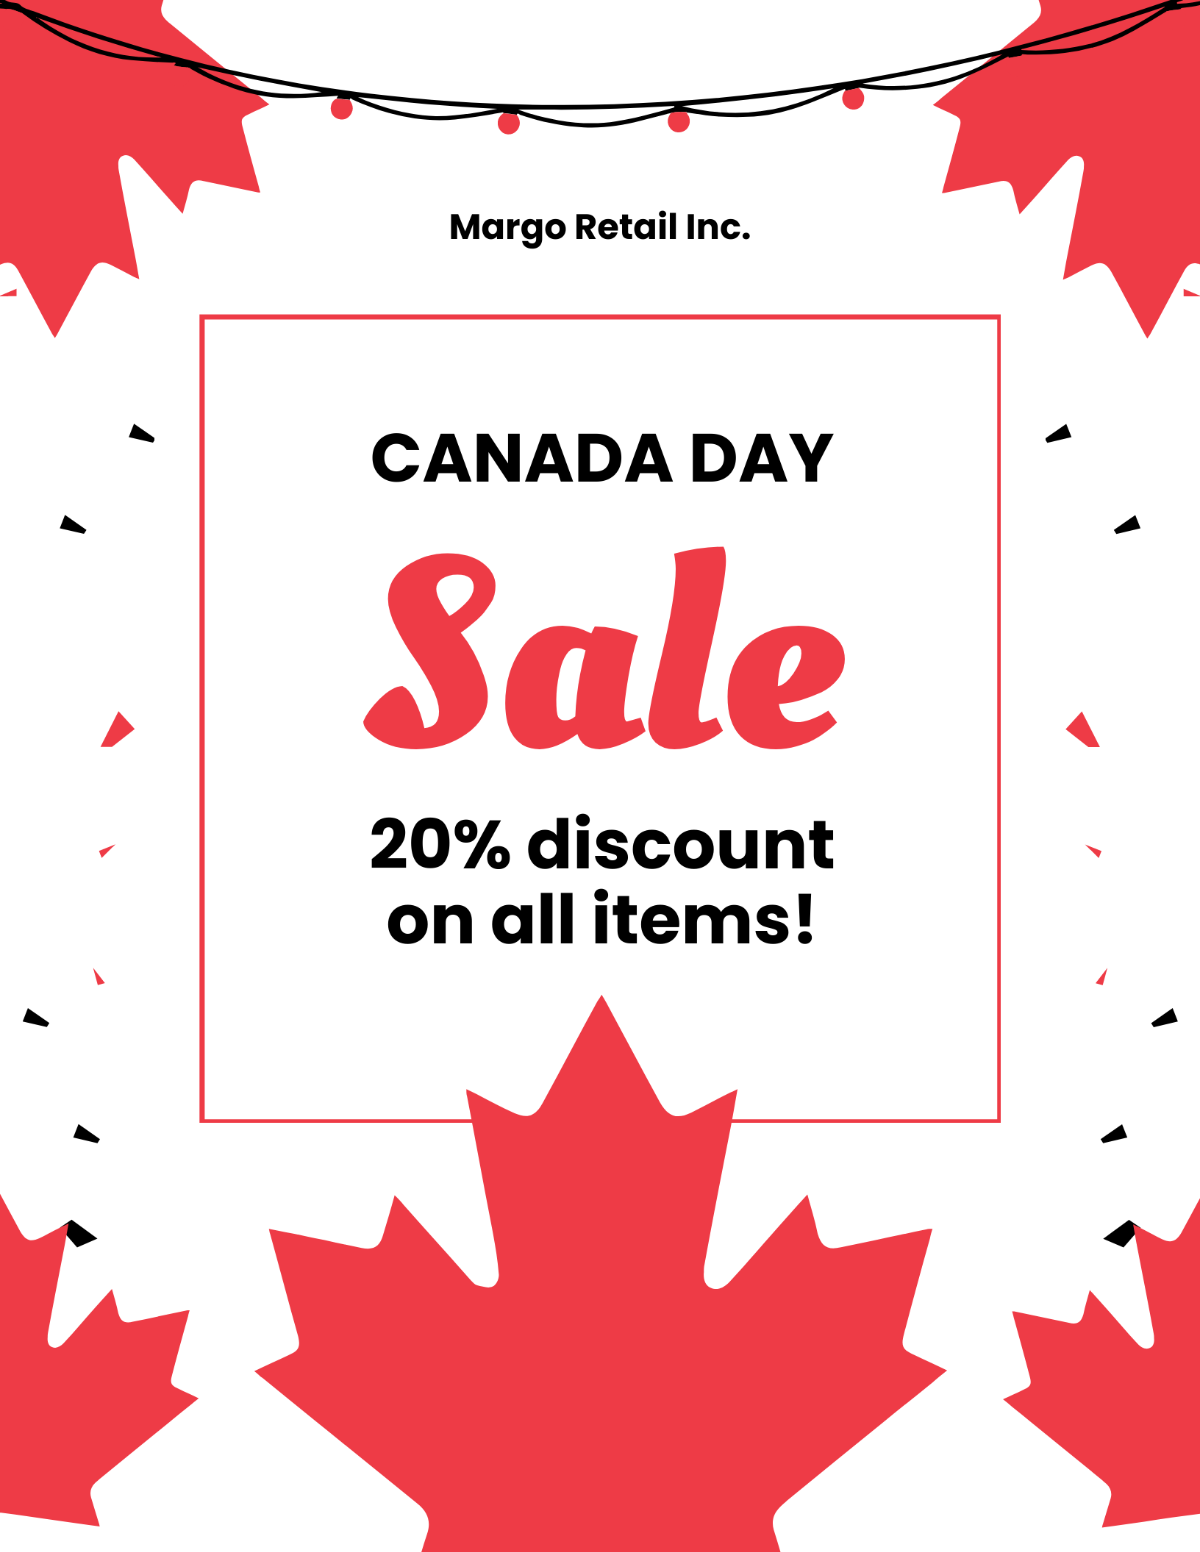 Free Canada Day Retail Sale Flyer Template